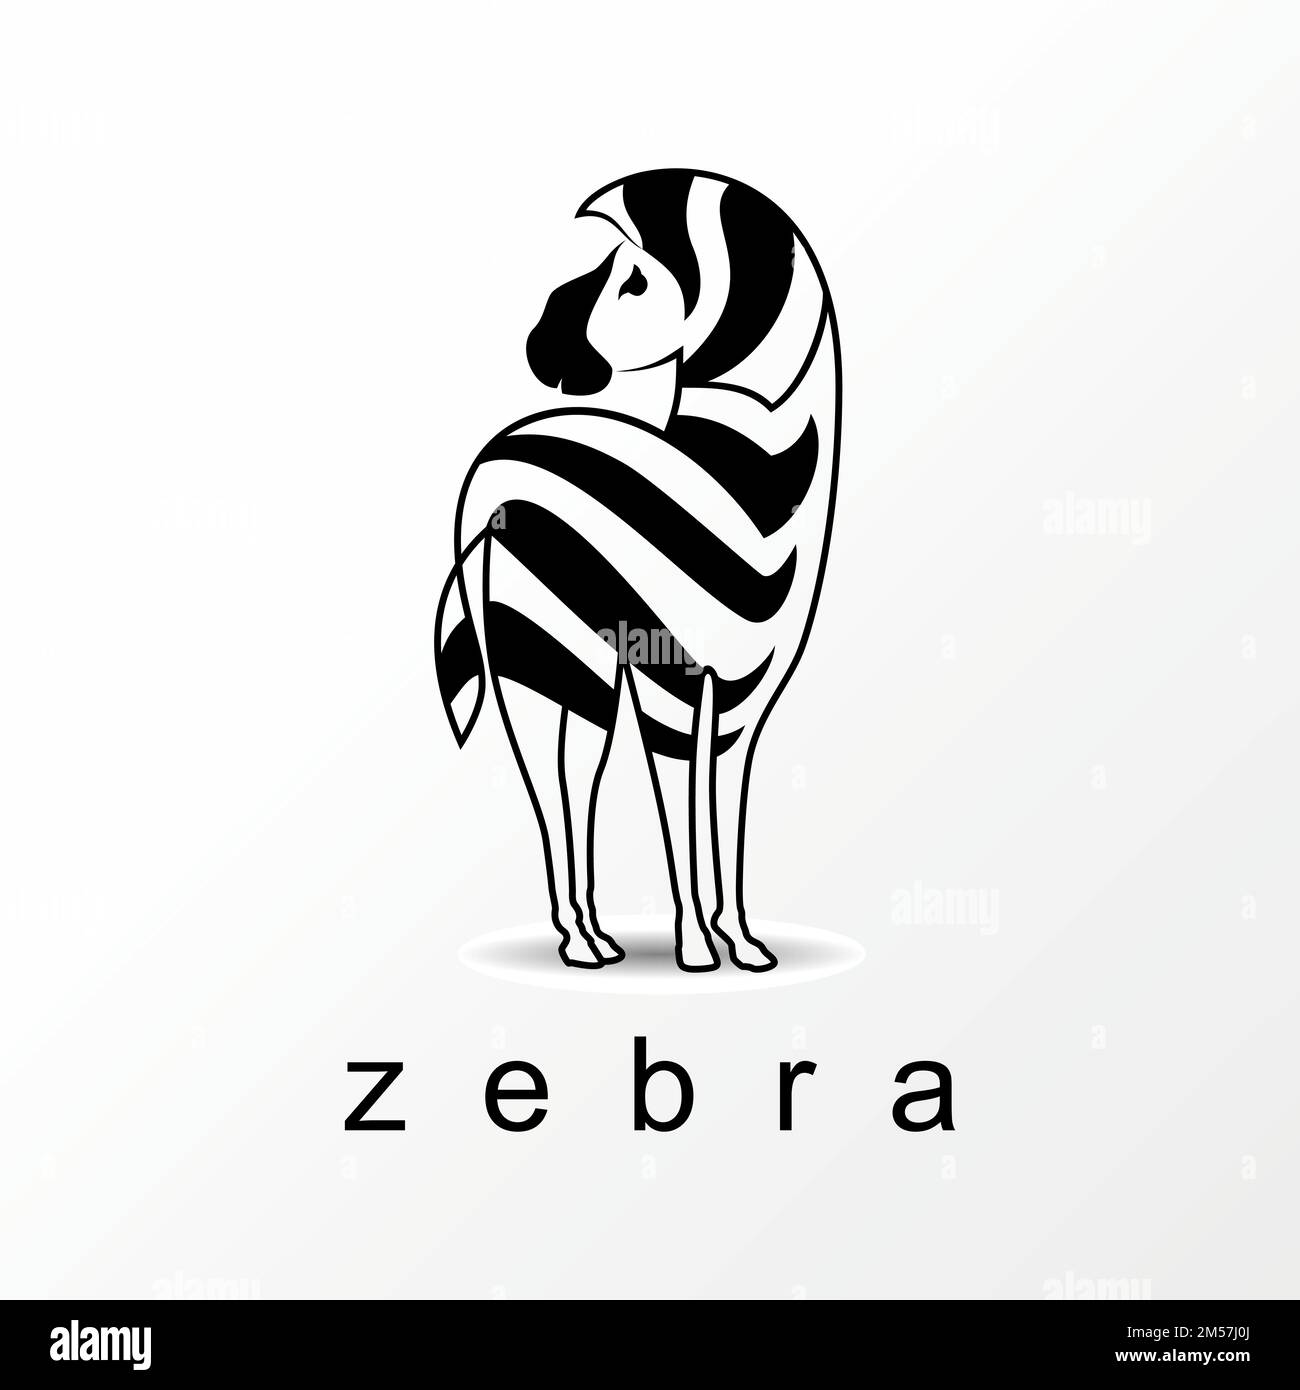 Simple and unique femininity zebra horse image graphic icon logo design abstract concept vector stock. symbol related to animal or character. Stock Vector